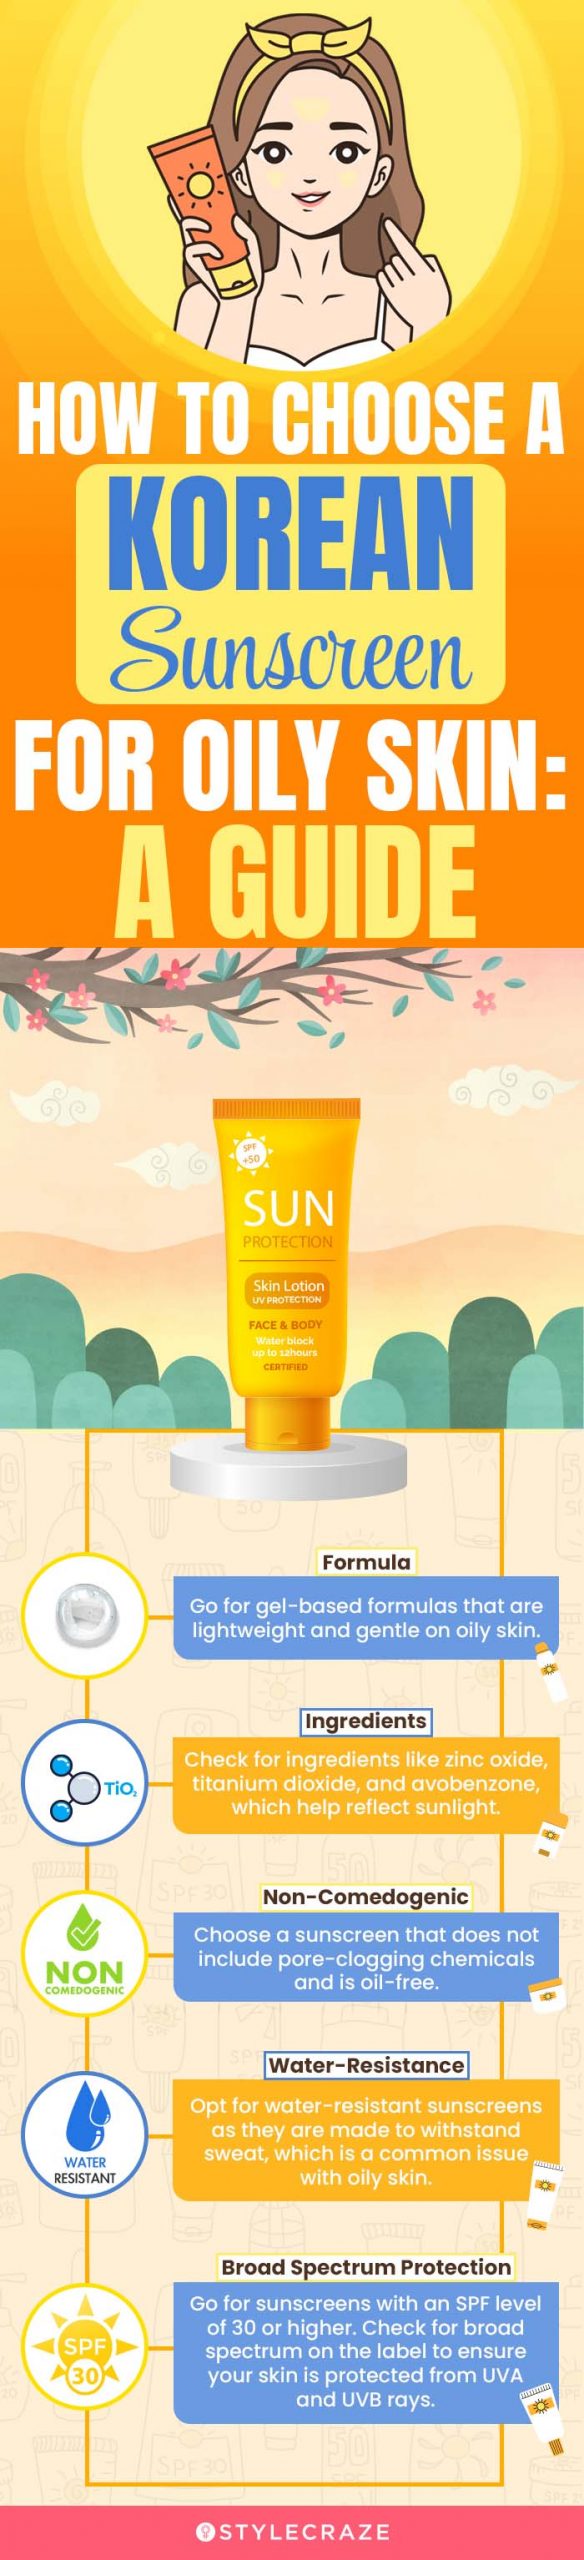 How to choose a Korean sunscreen for oily skin (infographic)